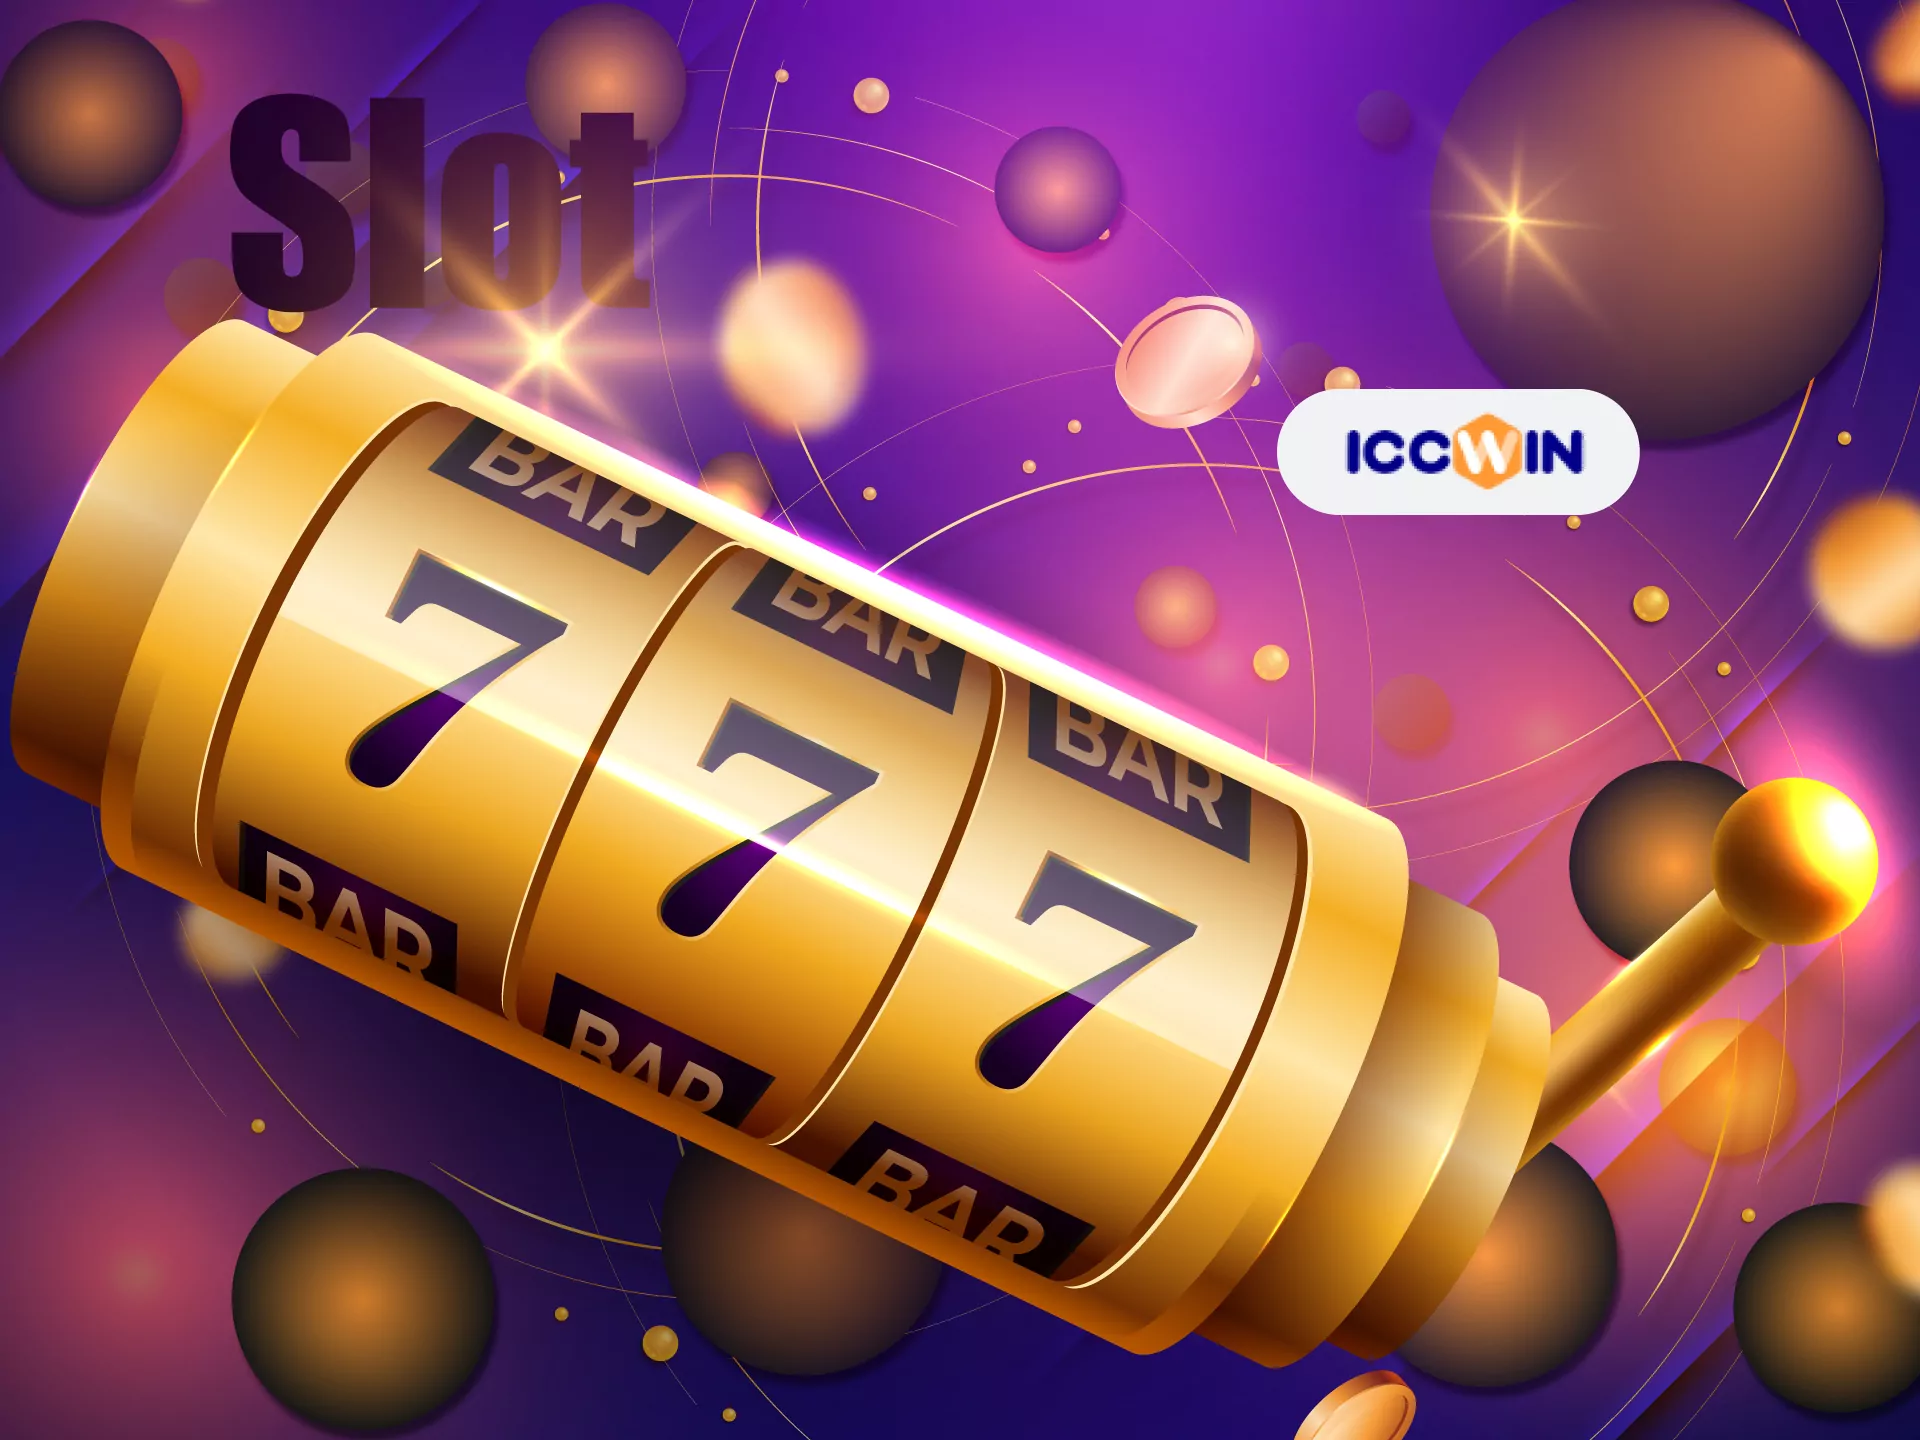 ICCWIN presents various slots with different topics for its players.